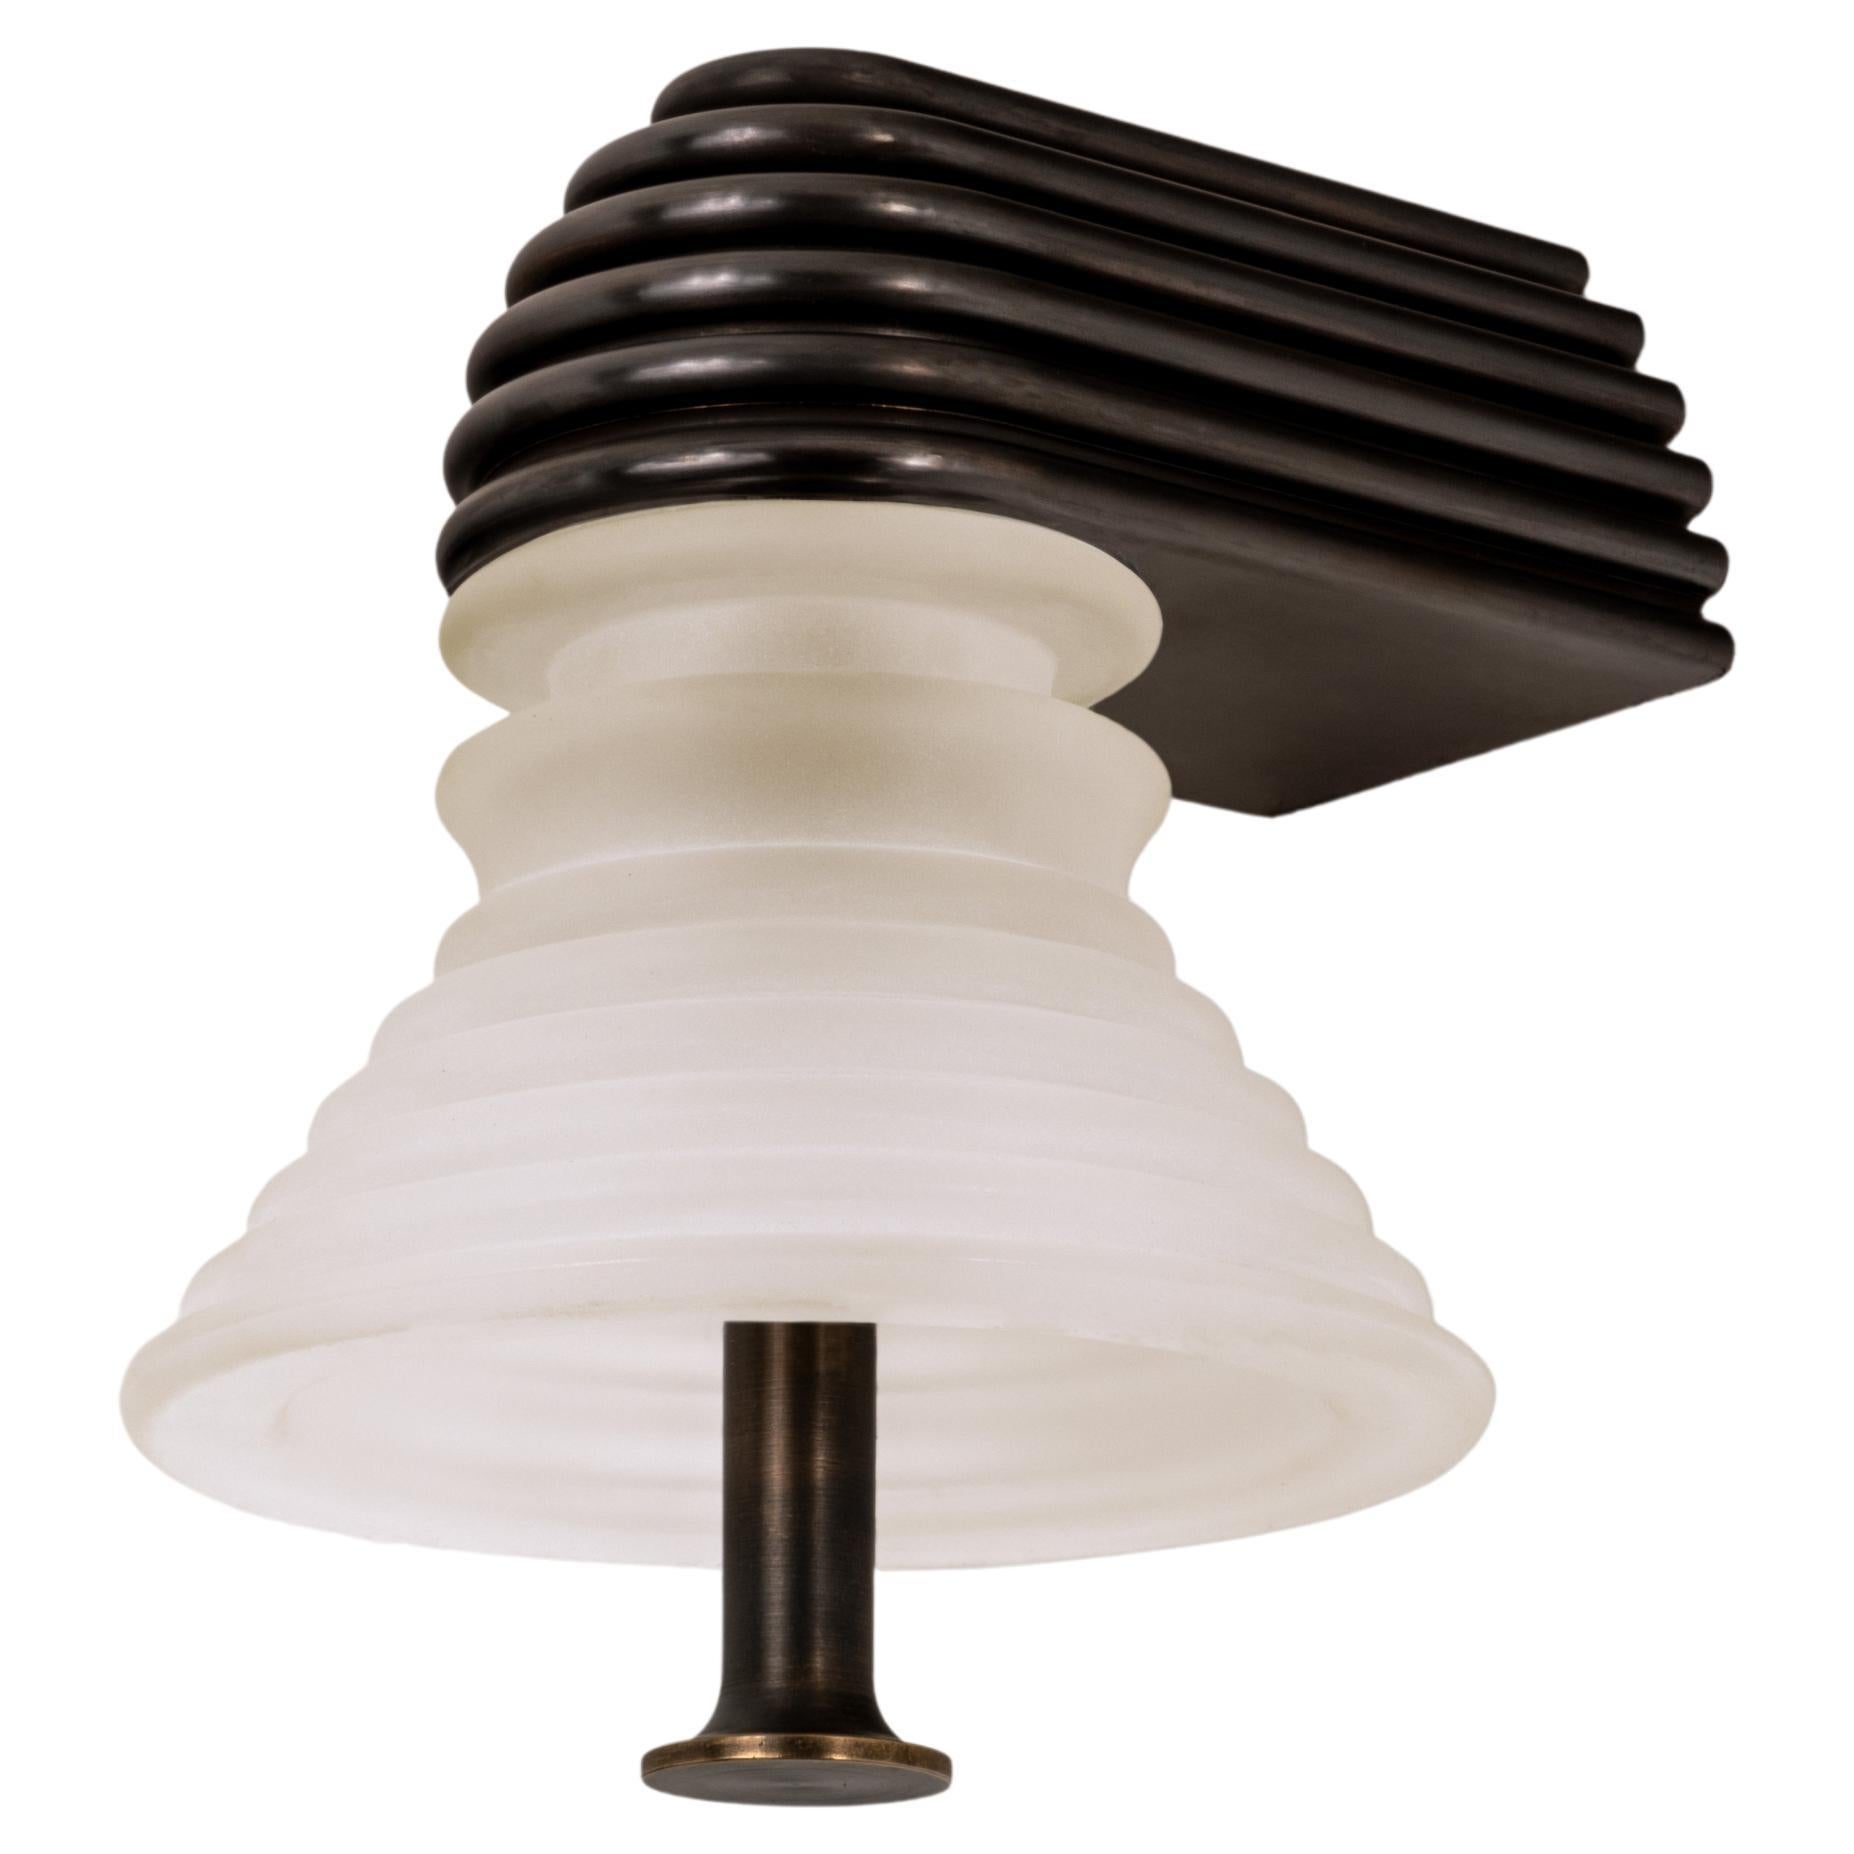 The Insulator 'A' Sconce in dark brass and frosted glass by NOVOCASTRIAN deco